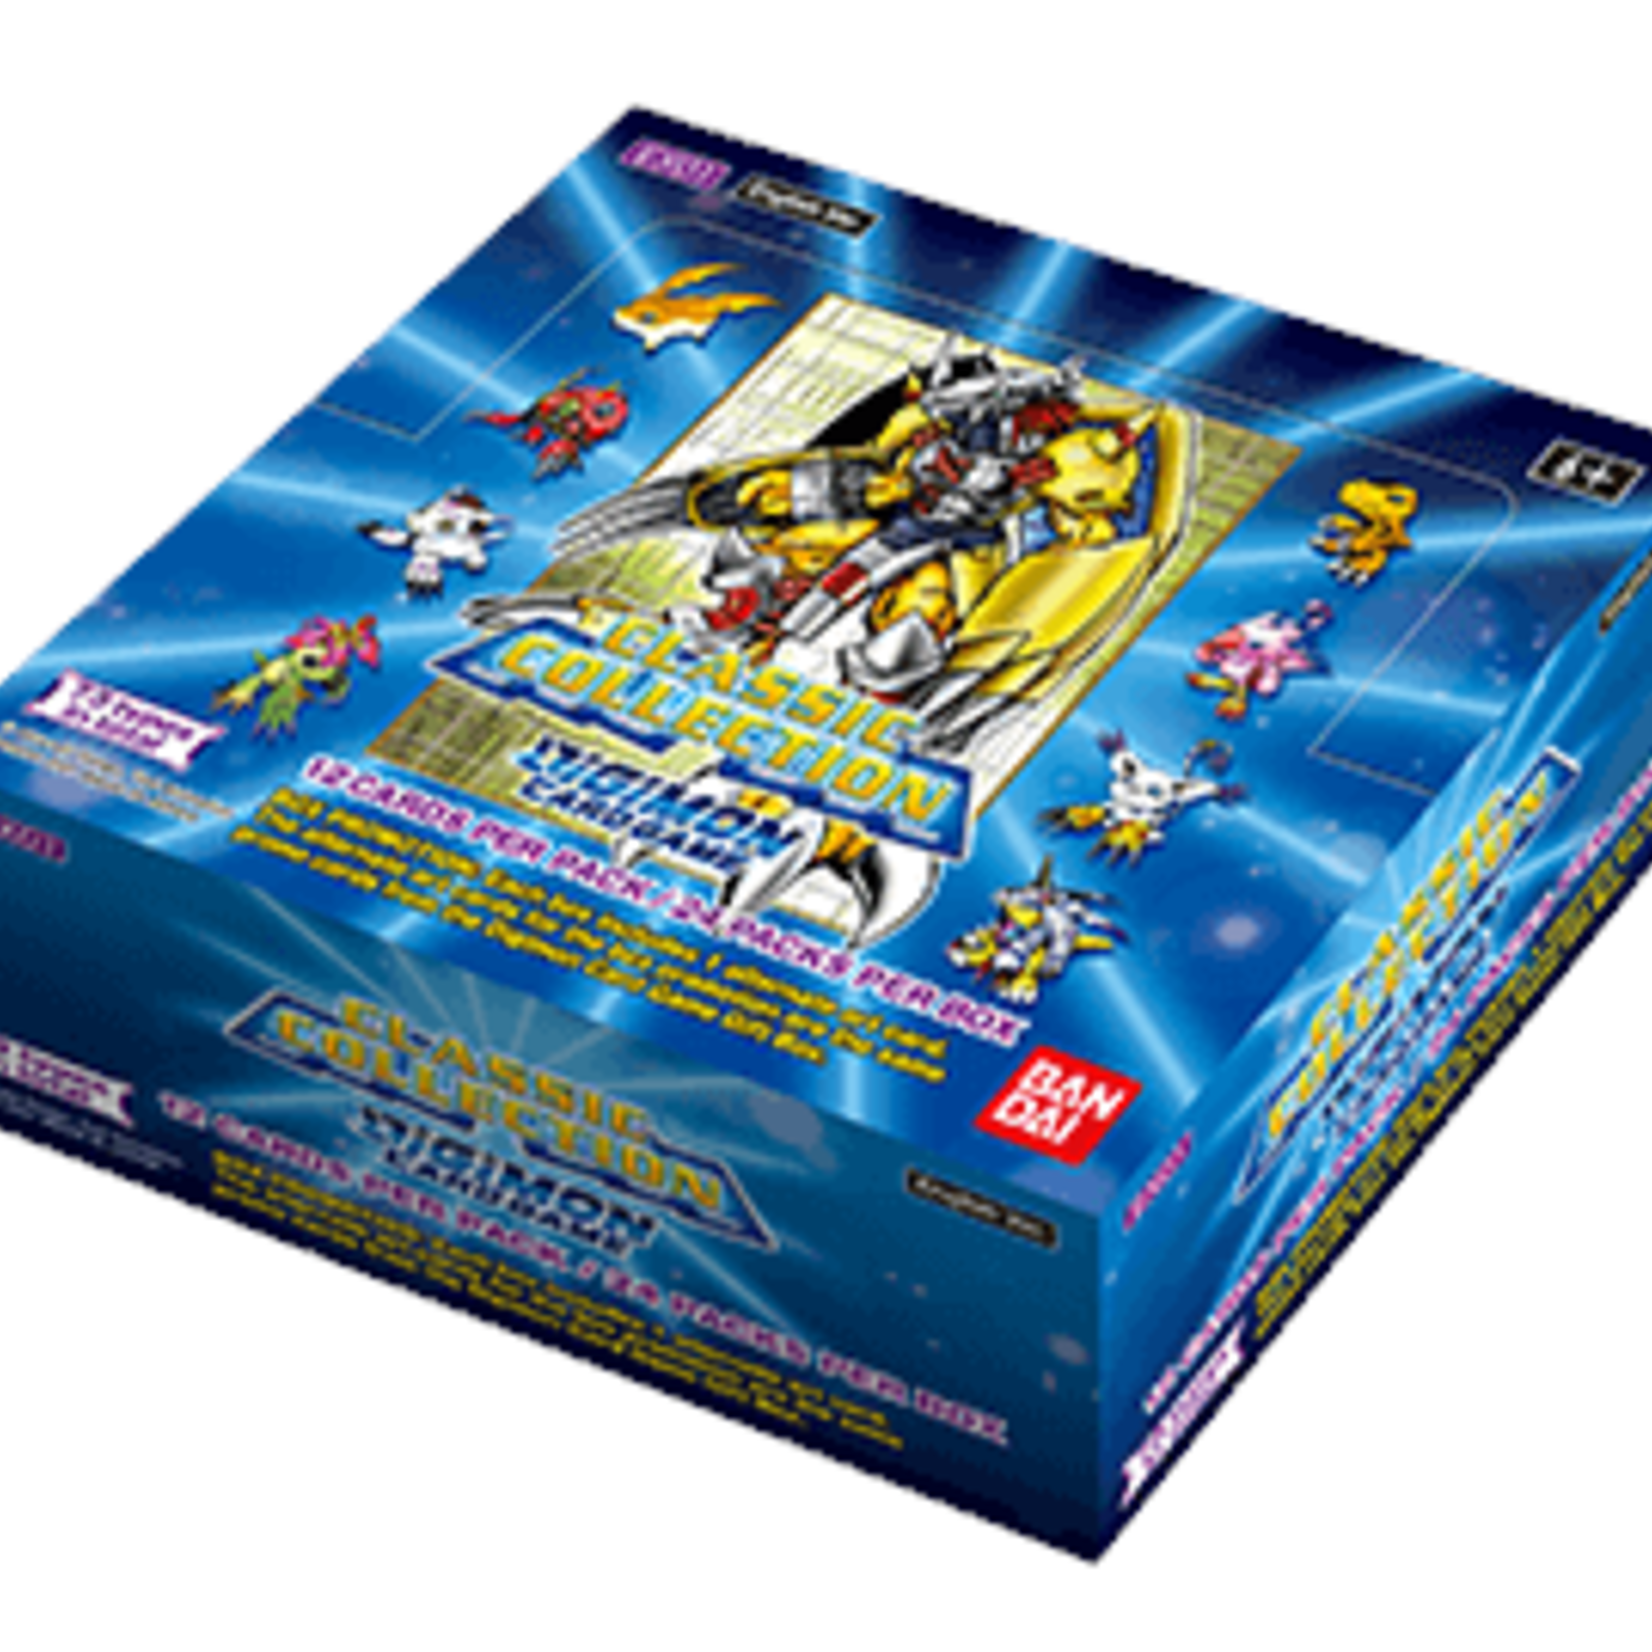 Bandai Digimon Trading Card Game: Classic Collection (EX01) - Booster Box